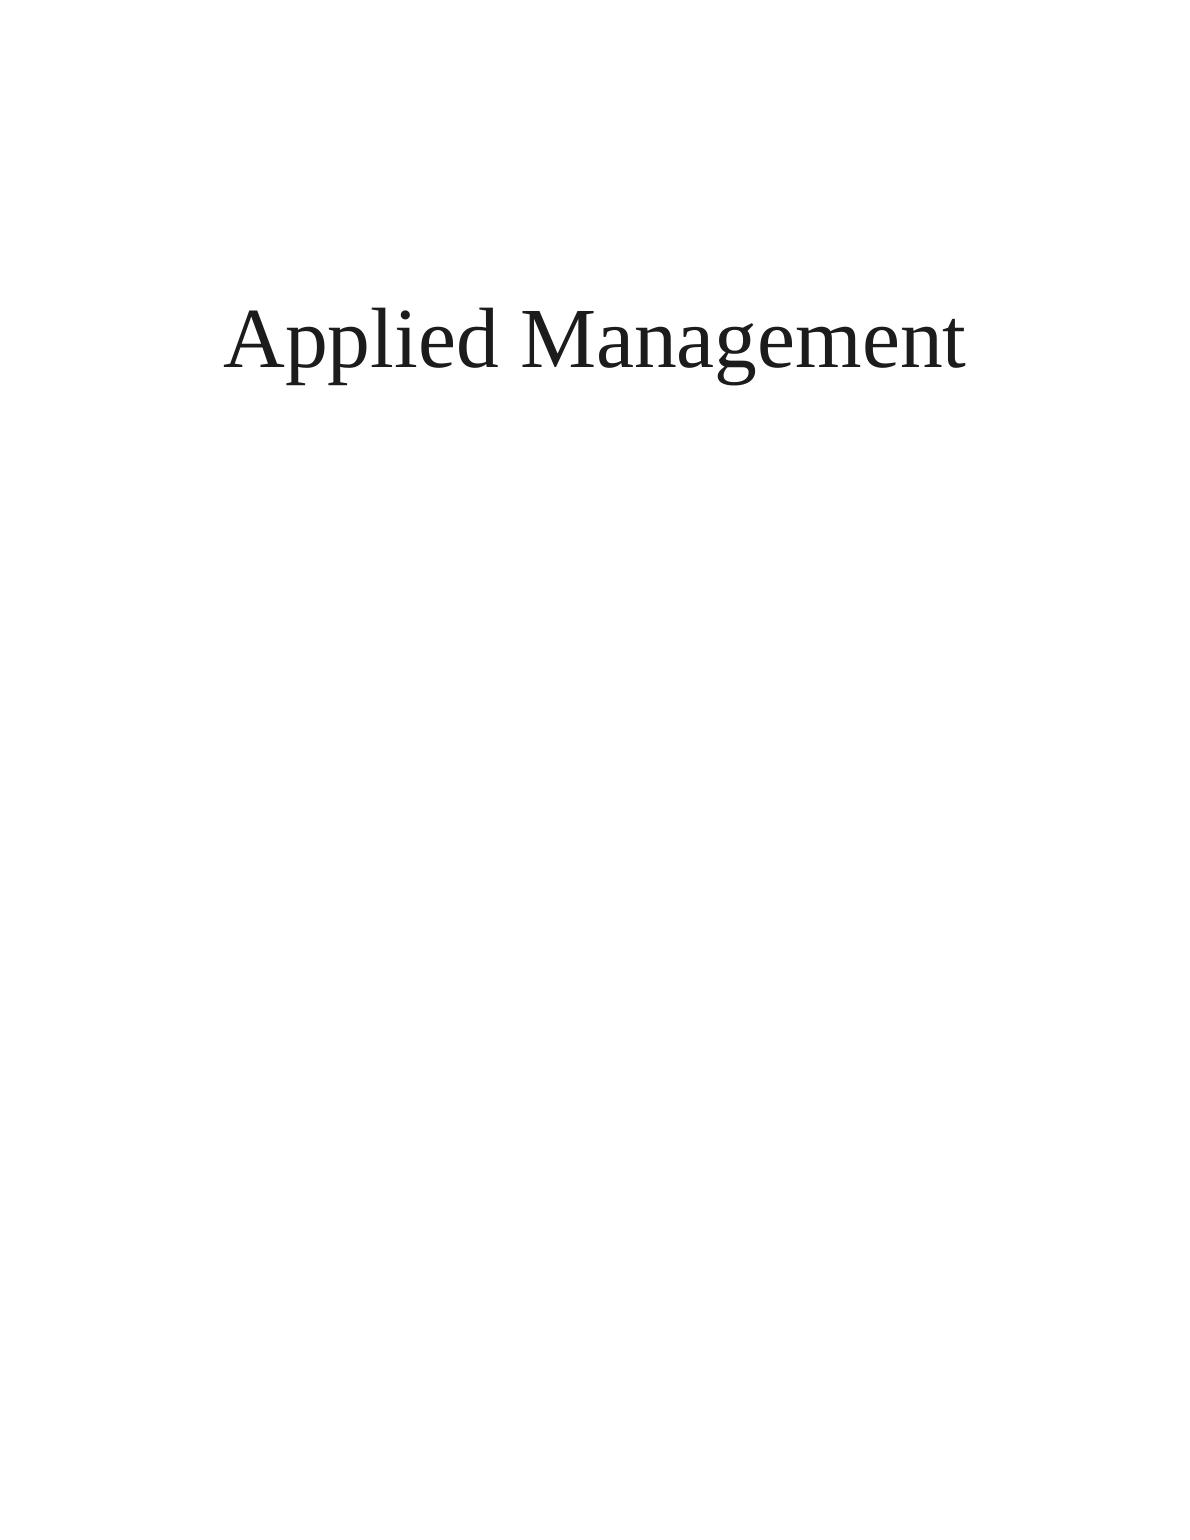 Report on Applied Management_1